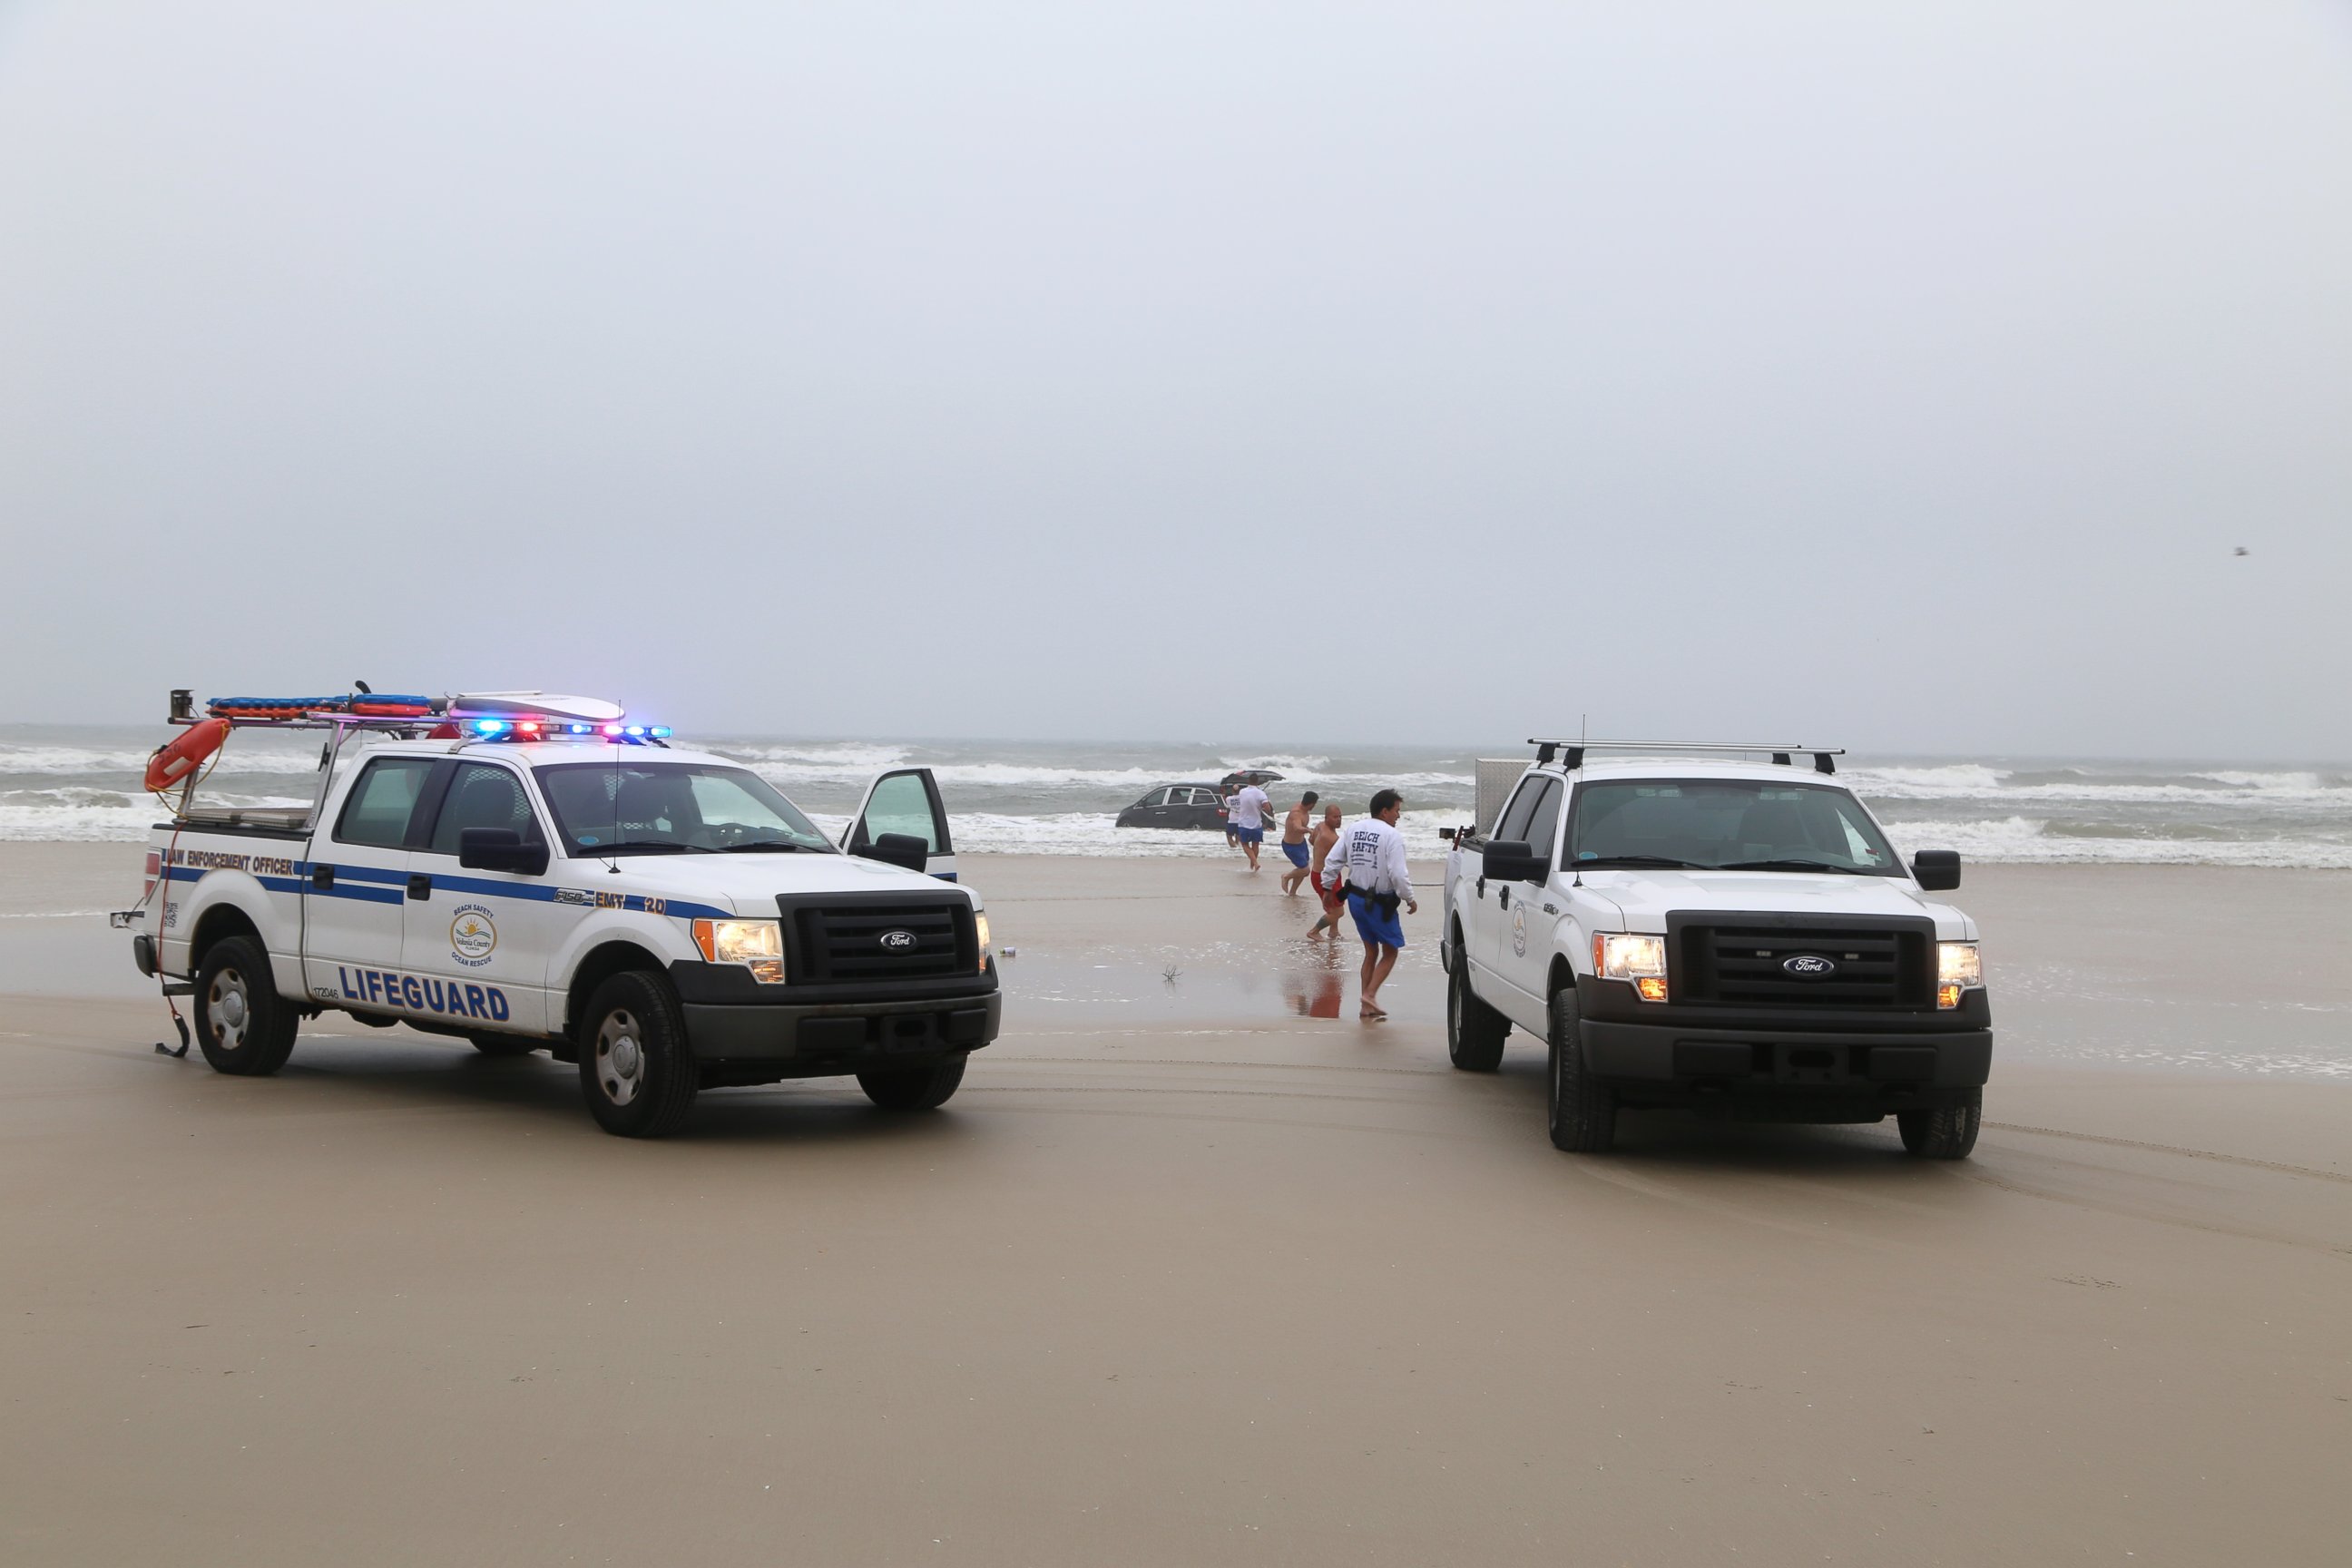 PHOTO: Lifeguards on scene to help rescue a family after a mother drives her car in to the ocean, March 5, 2014 in Daytona Beach, Fla.